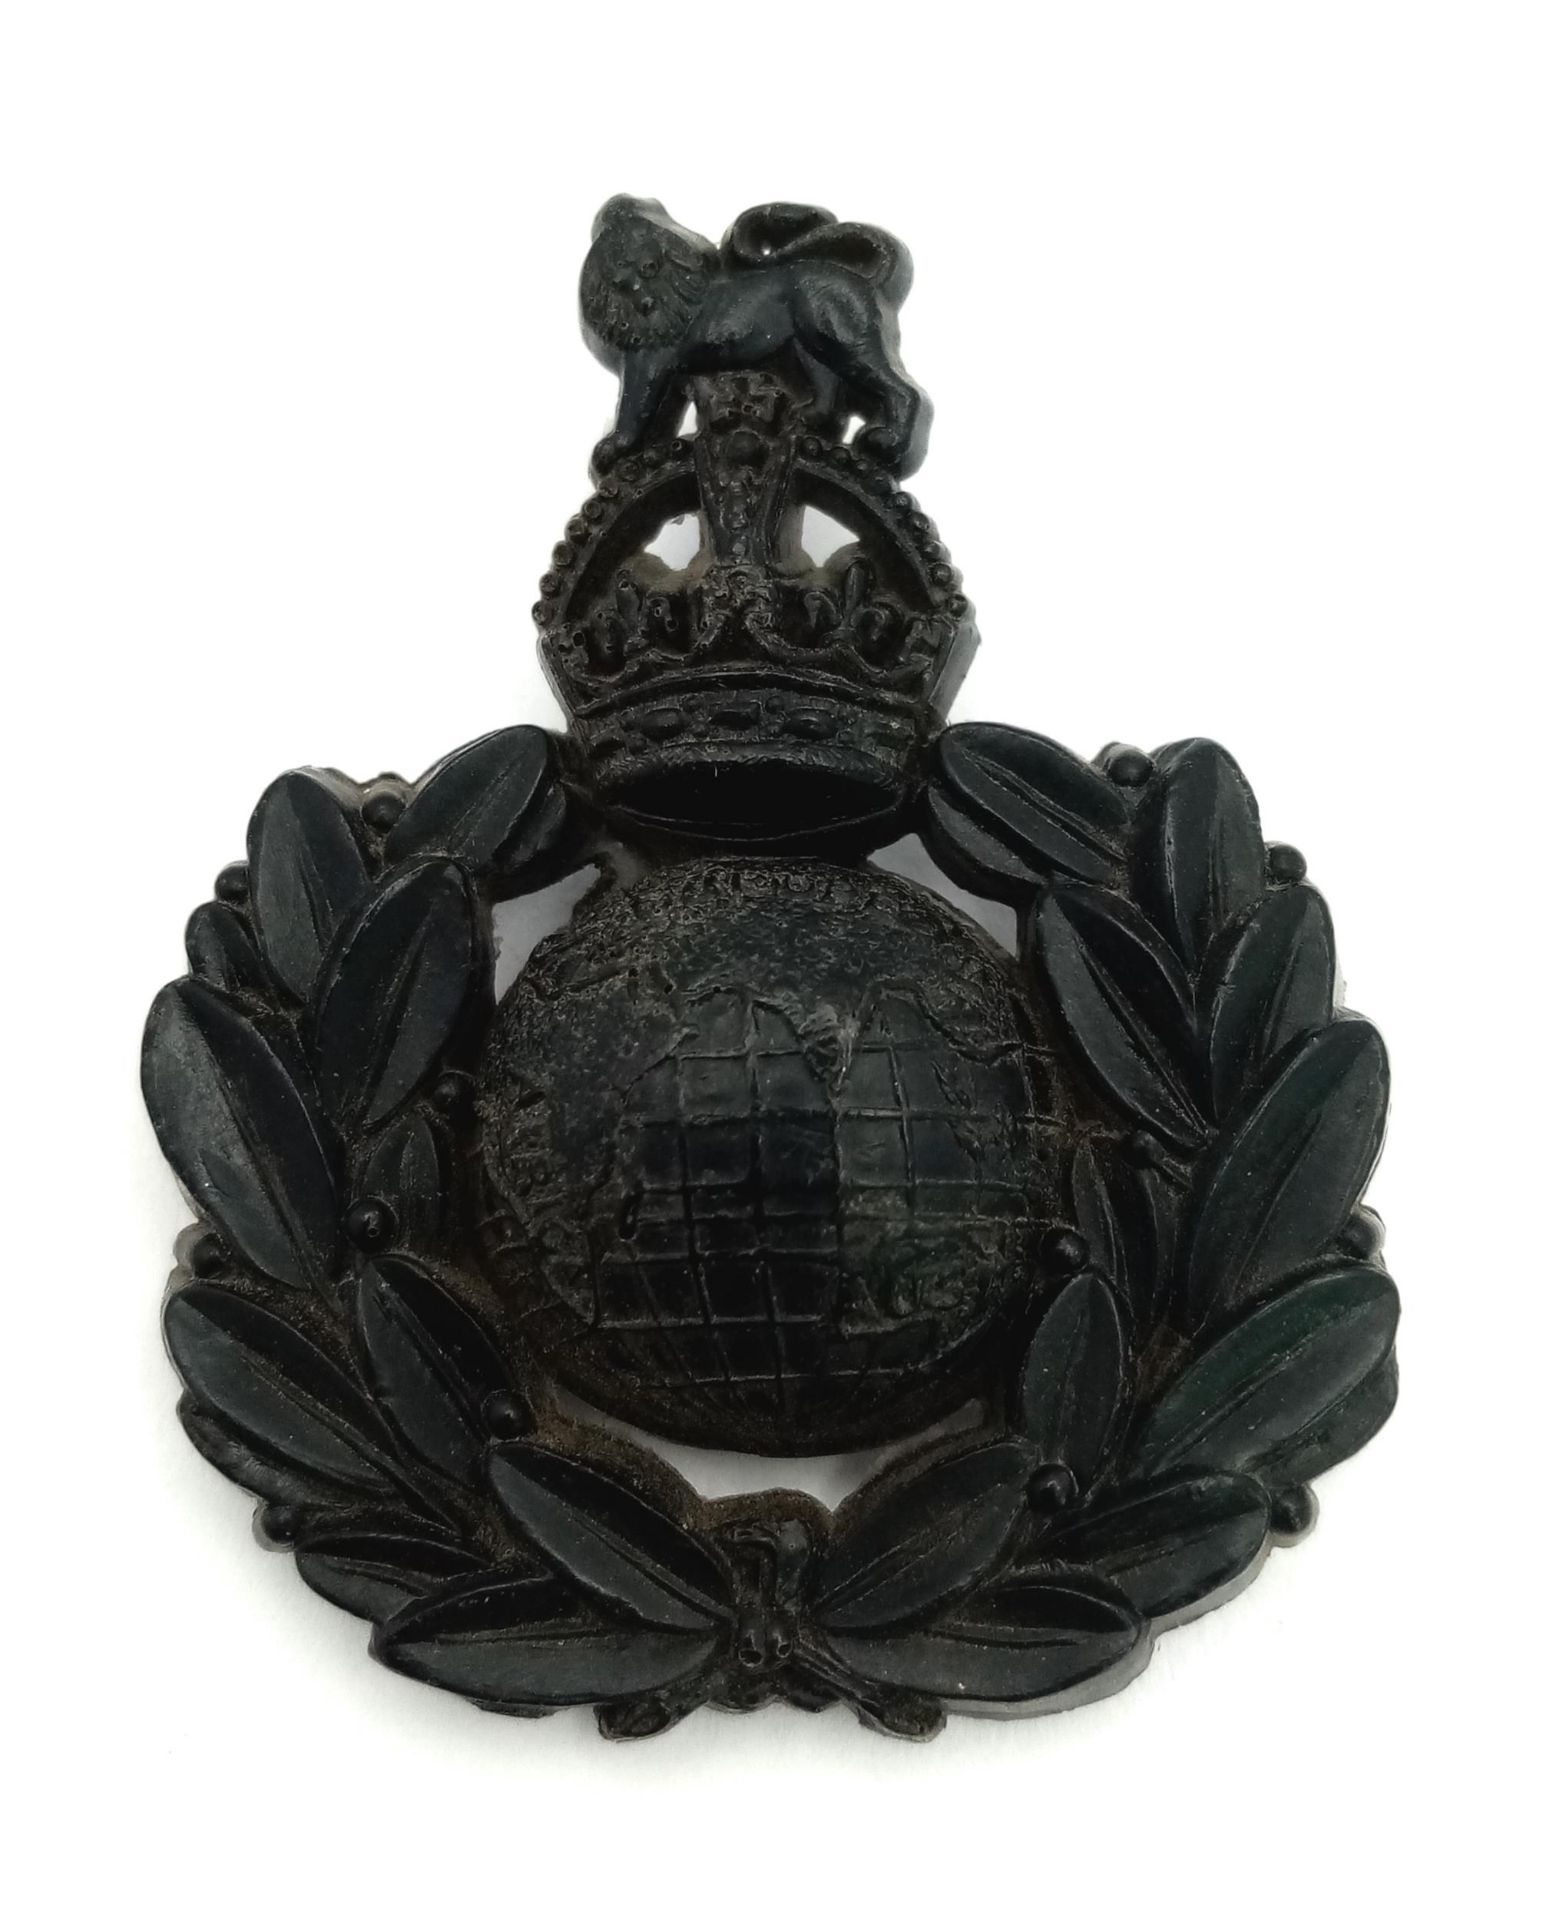 WW2 Plastic (Cellulose Acetate) Economy Issue Royal Marine Cap Badge. Maker Marked: A. Stanley &